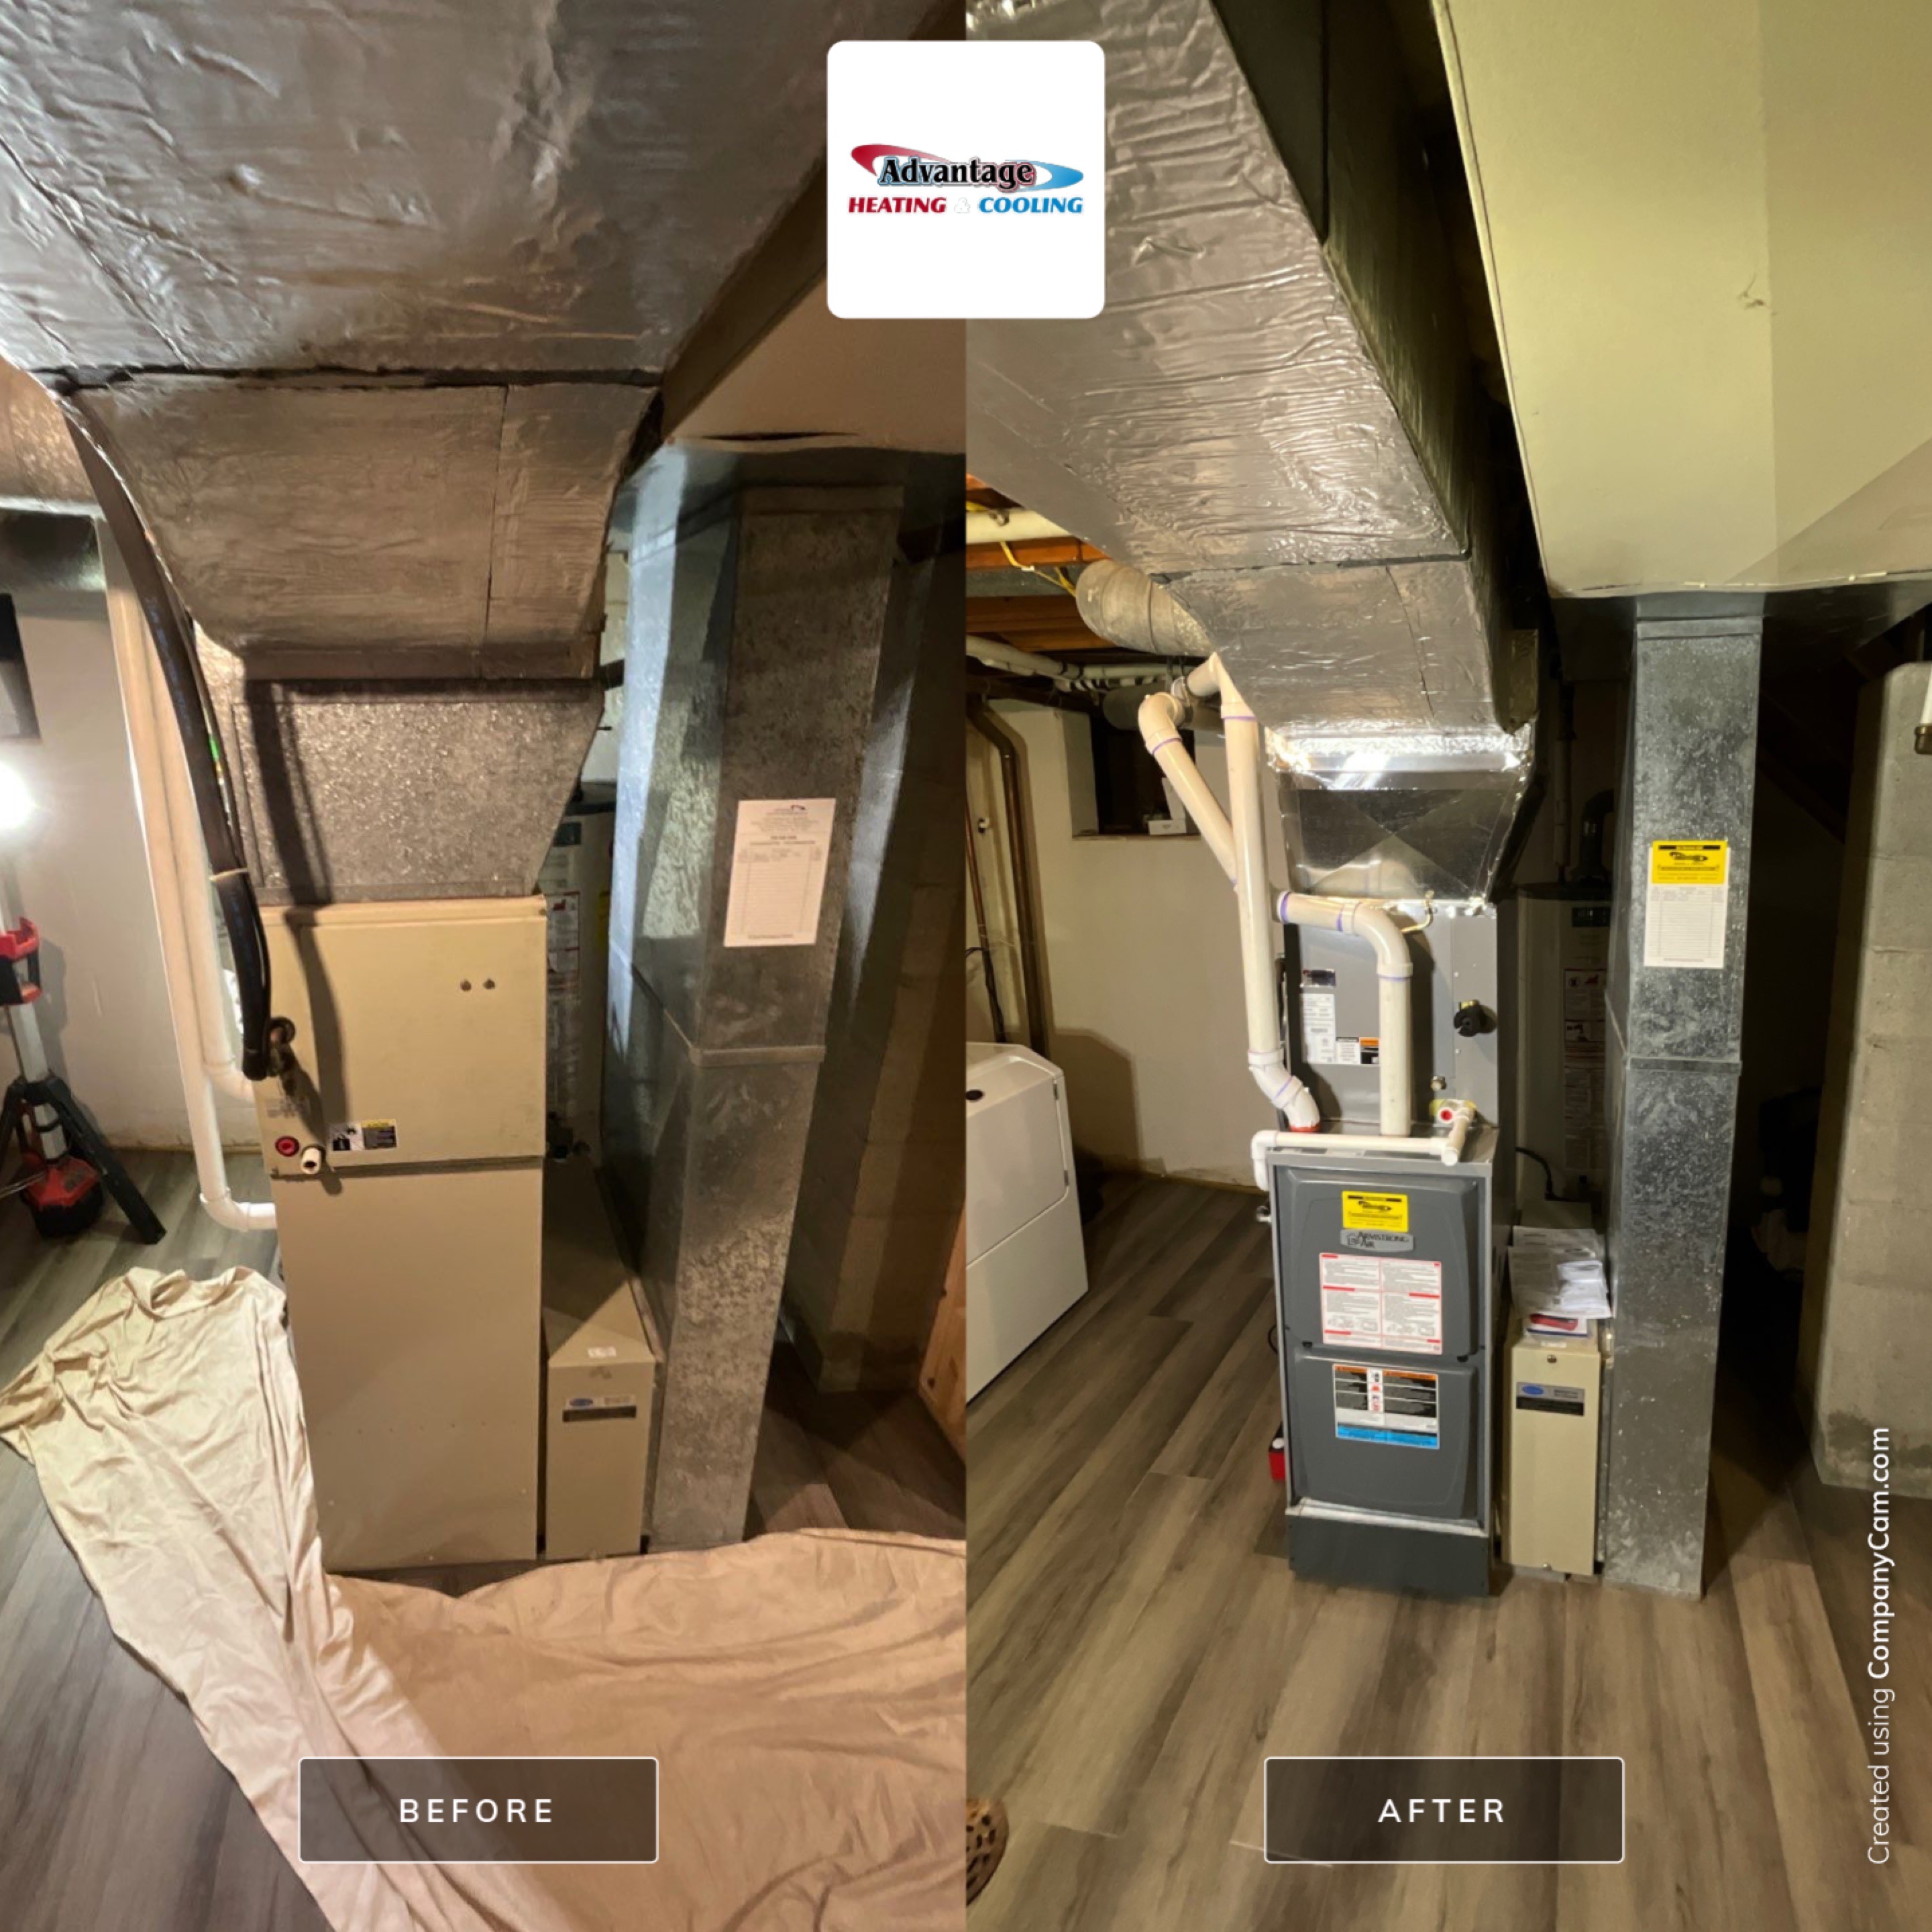 Carrier Furnace Replacement with Armstrong Air Gas Furnace Image